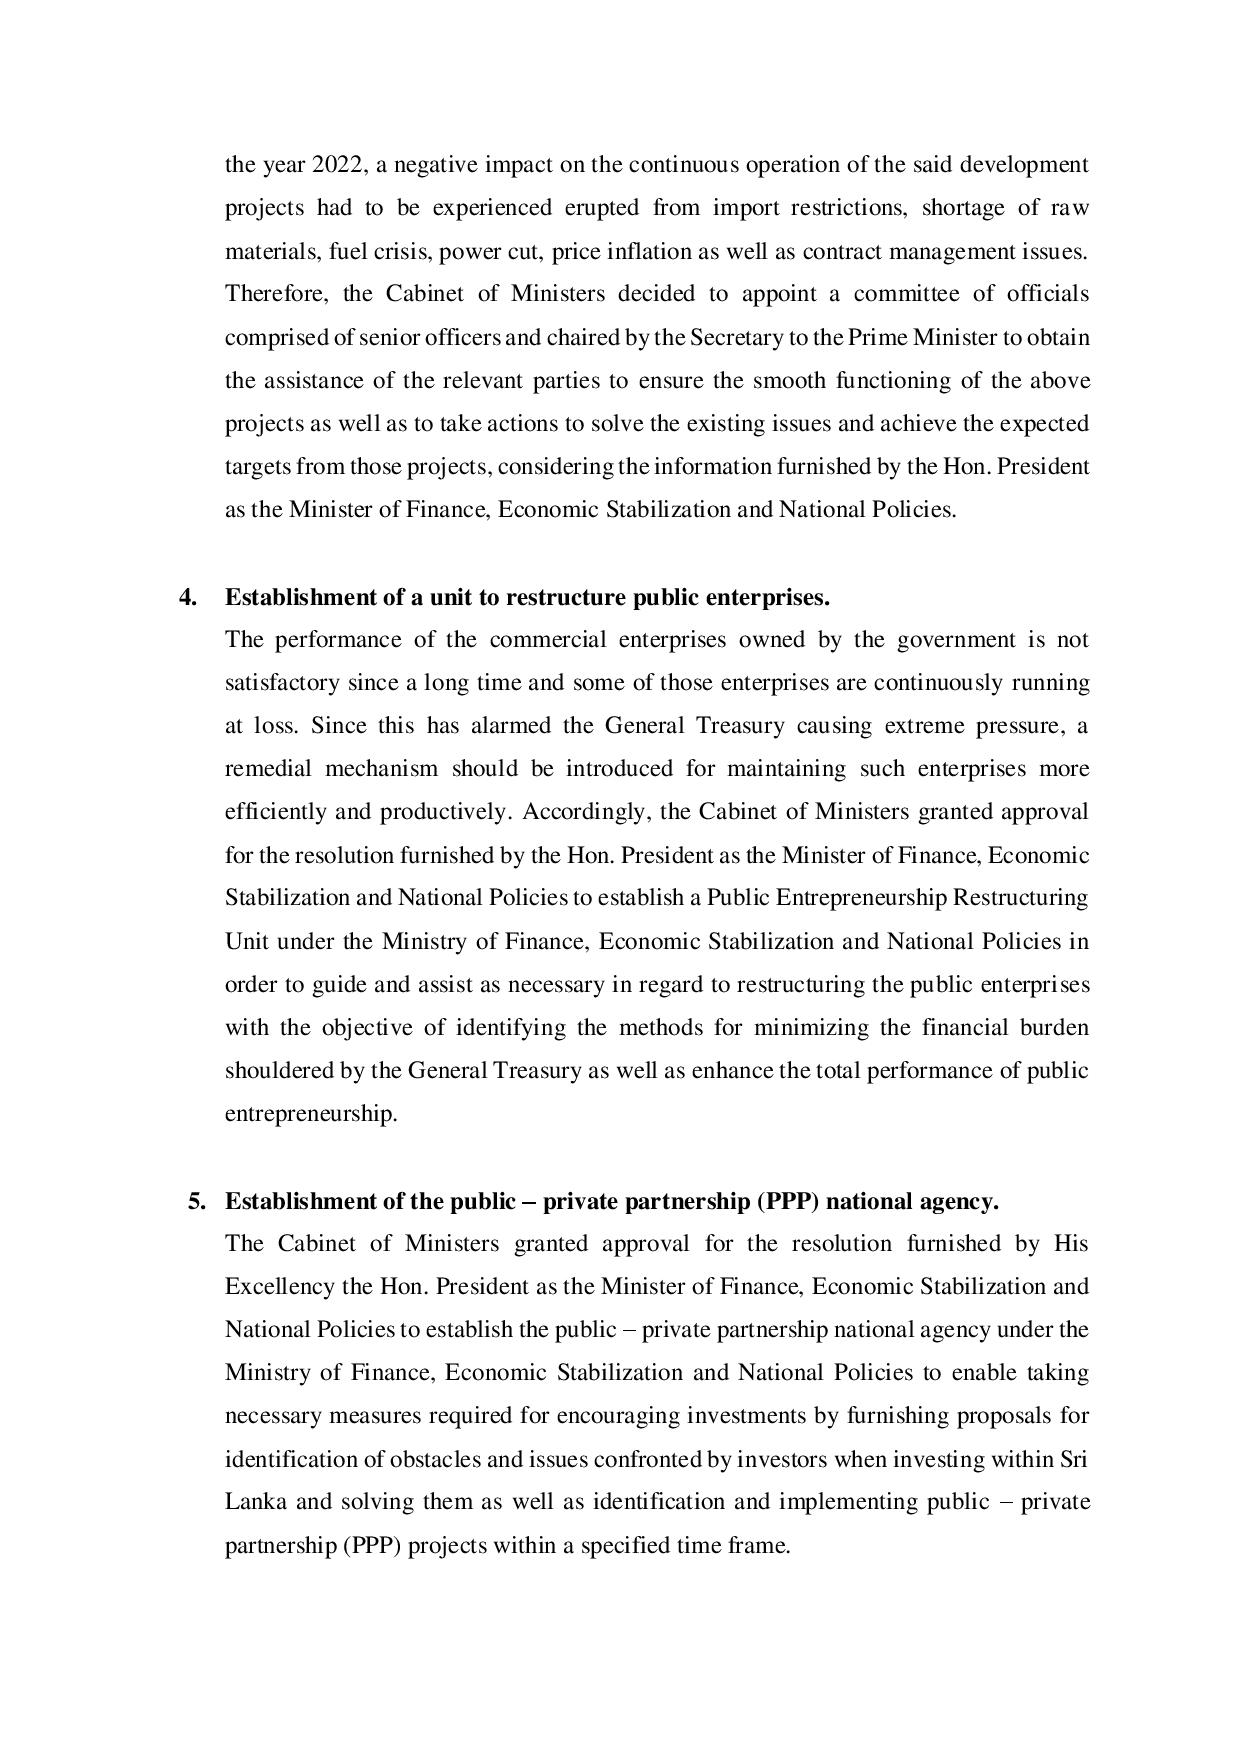 Decisions taken at the meeting of the Cabinet of Ministers held on the 05.09.2022 page 002